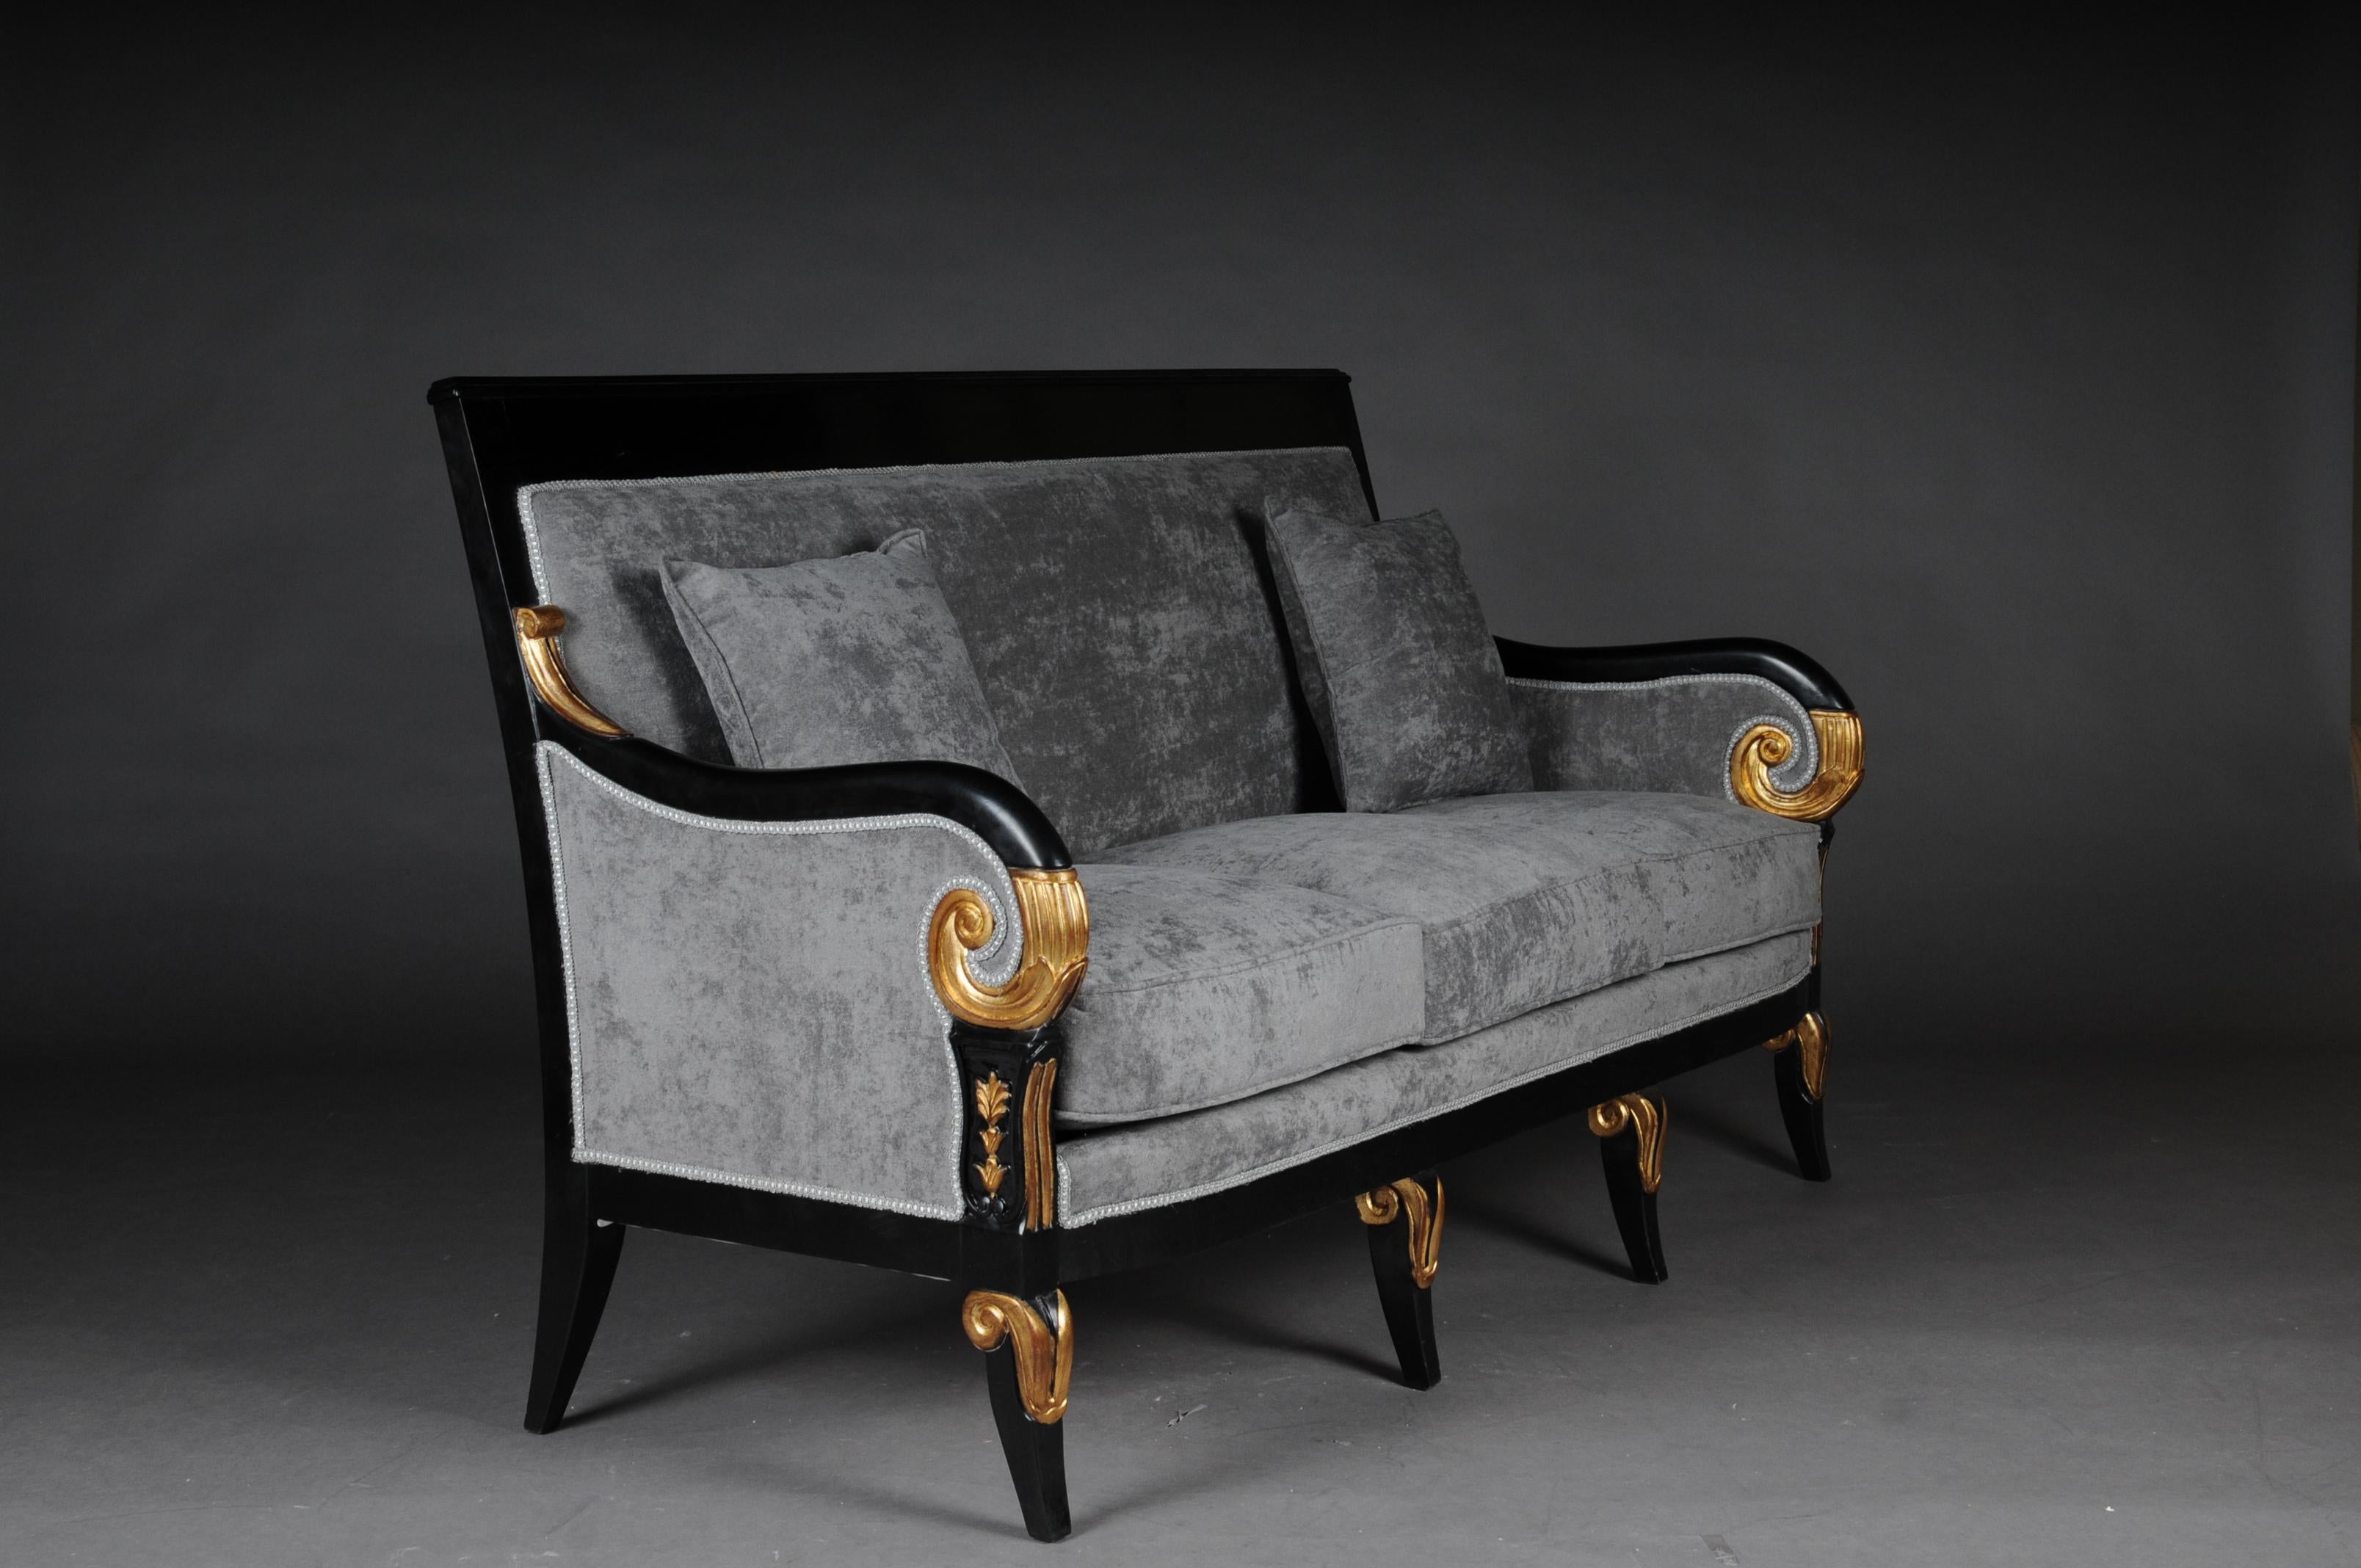 20th century French Empire Salon Sofa/Couch, black

Very specific finely detailed carving work on solid ebonized beechwood. Partially gilded. Cumbered bottom skirt on curved legs. Bowed arm rests for light ascending arms in rolled voluted endings.